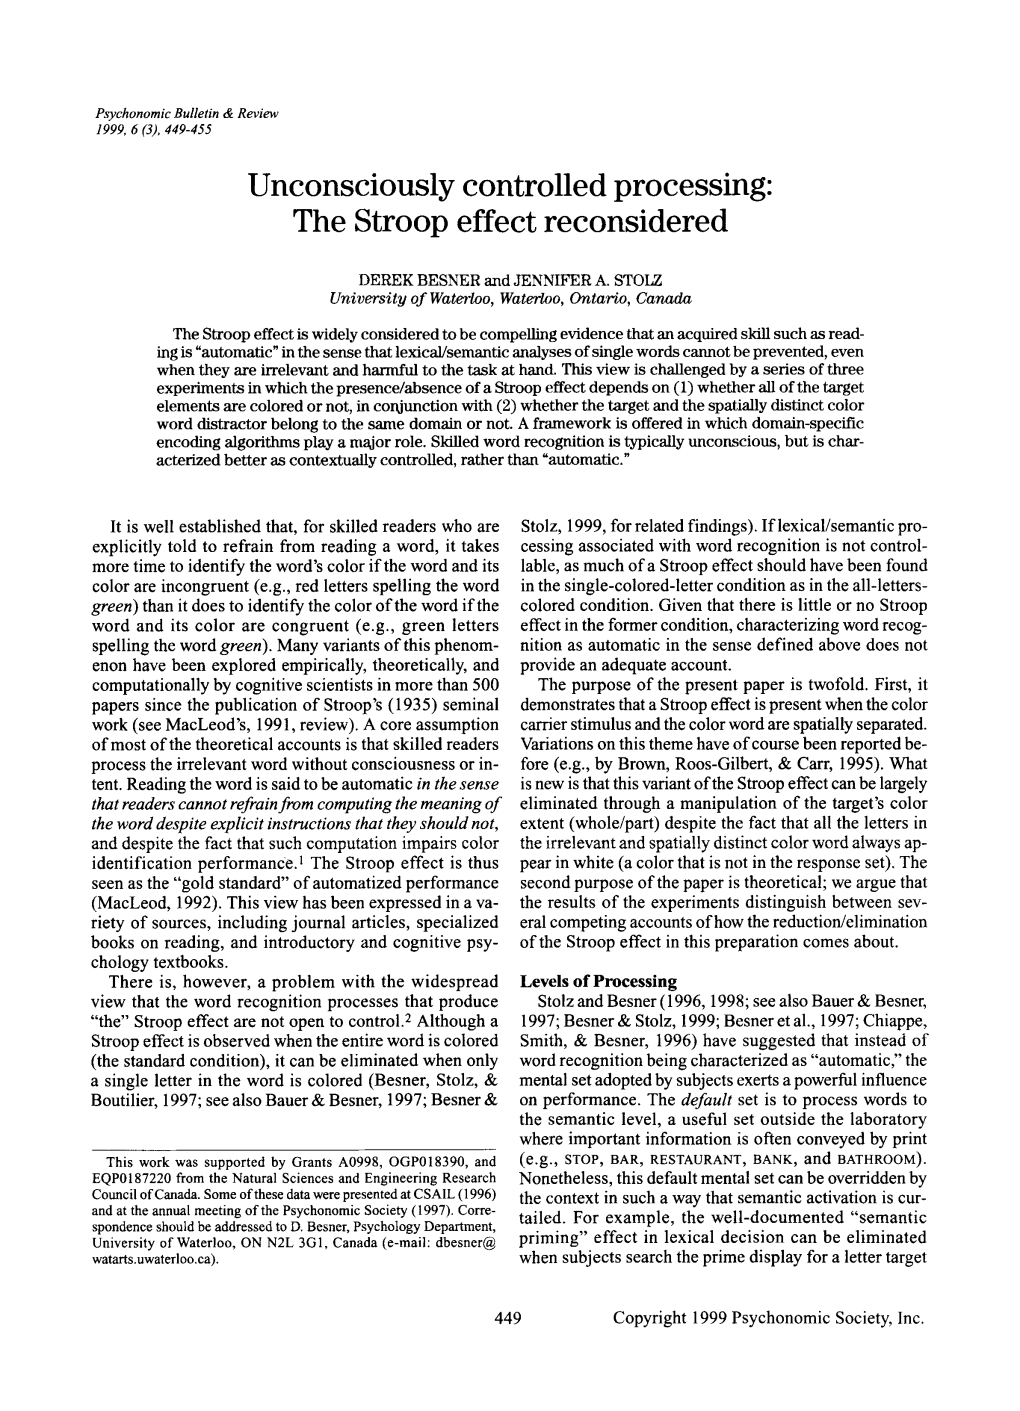 Unconsciously Controlled Processing: the Stroop Effect Reconsidered